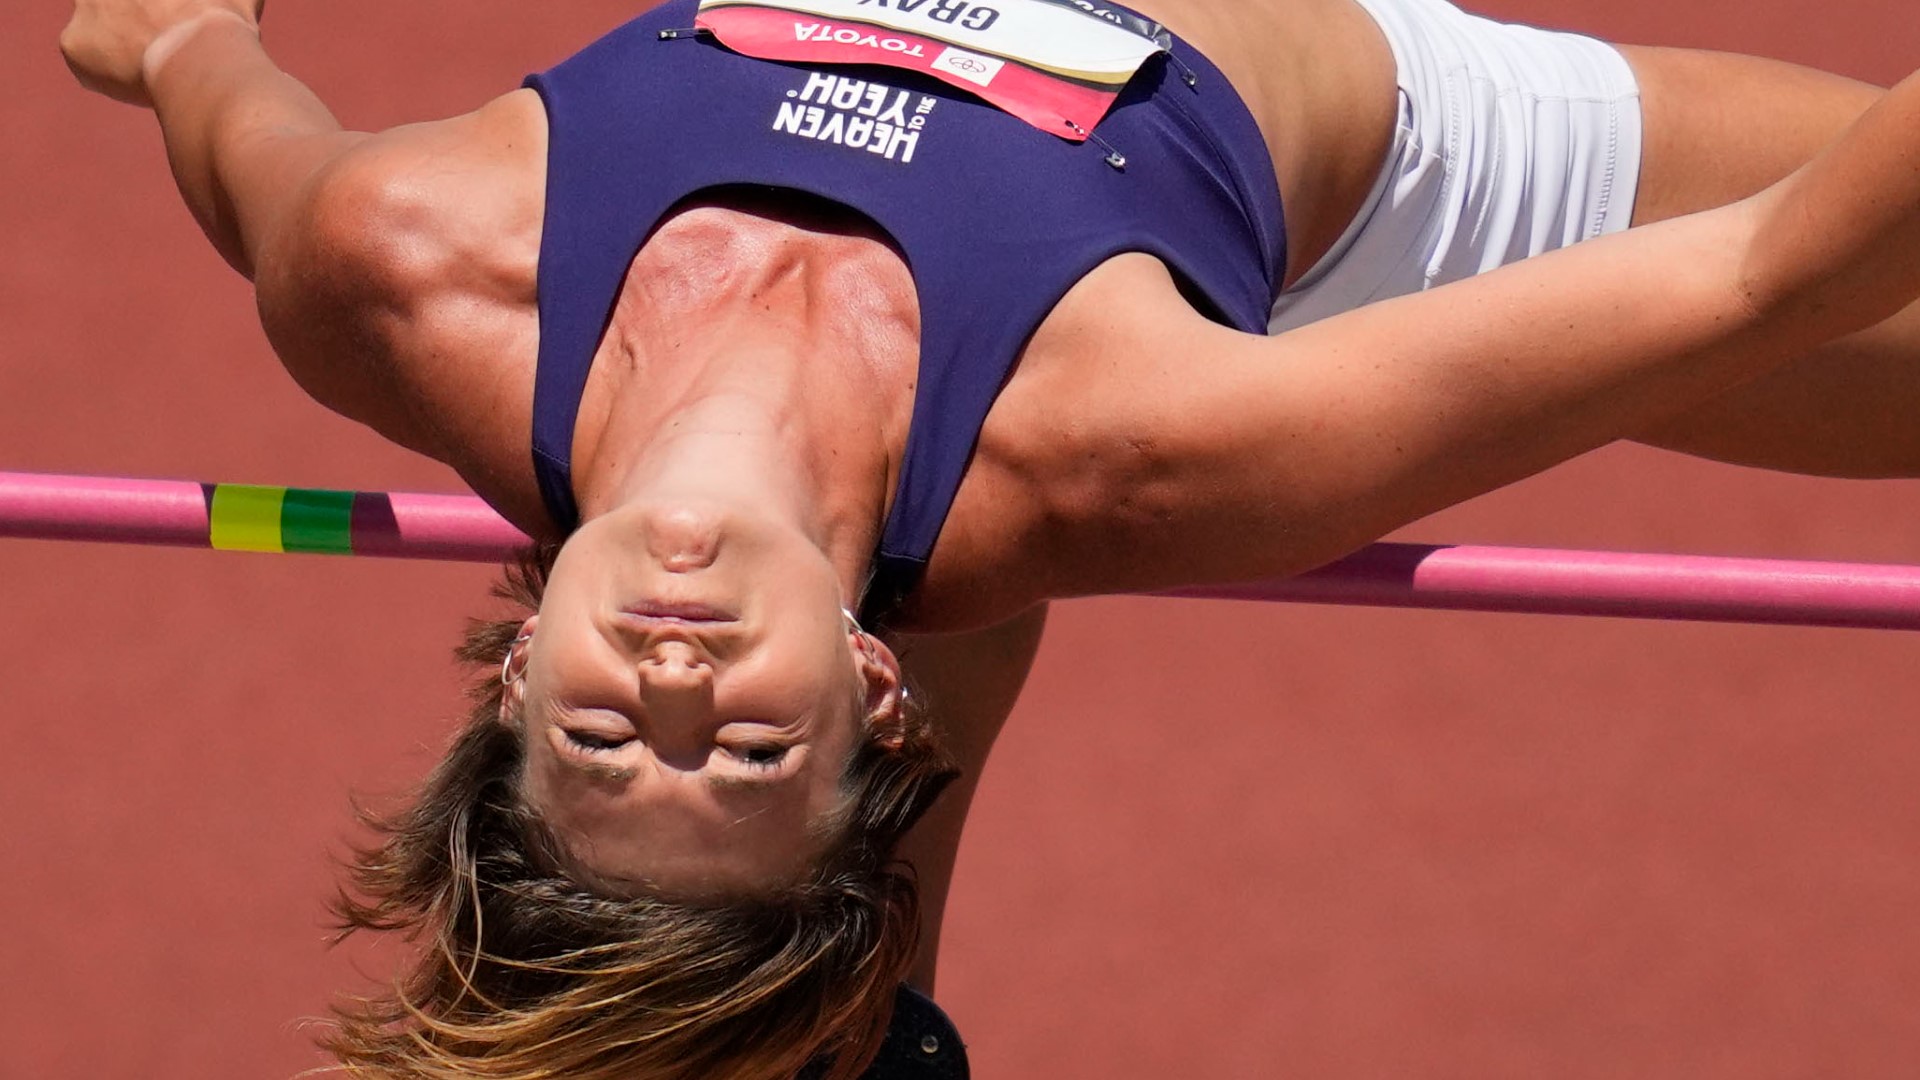 Which sports are in the Olympic decathlon?